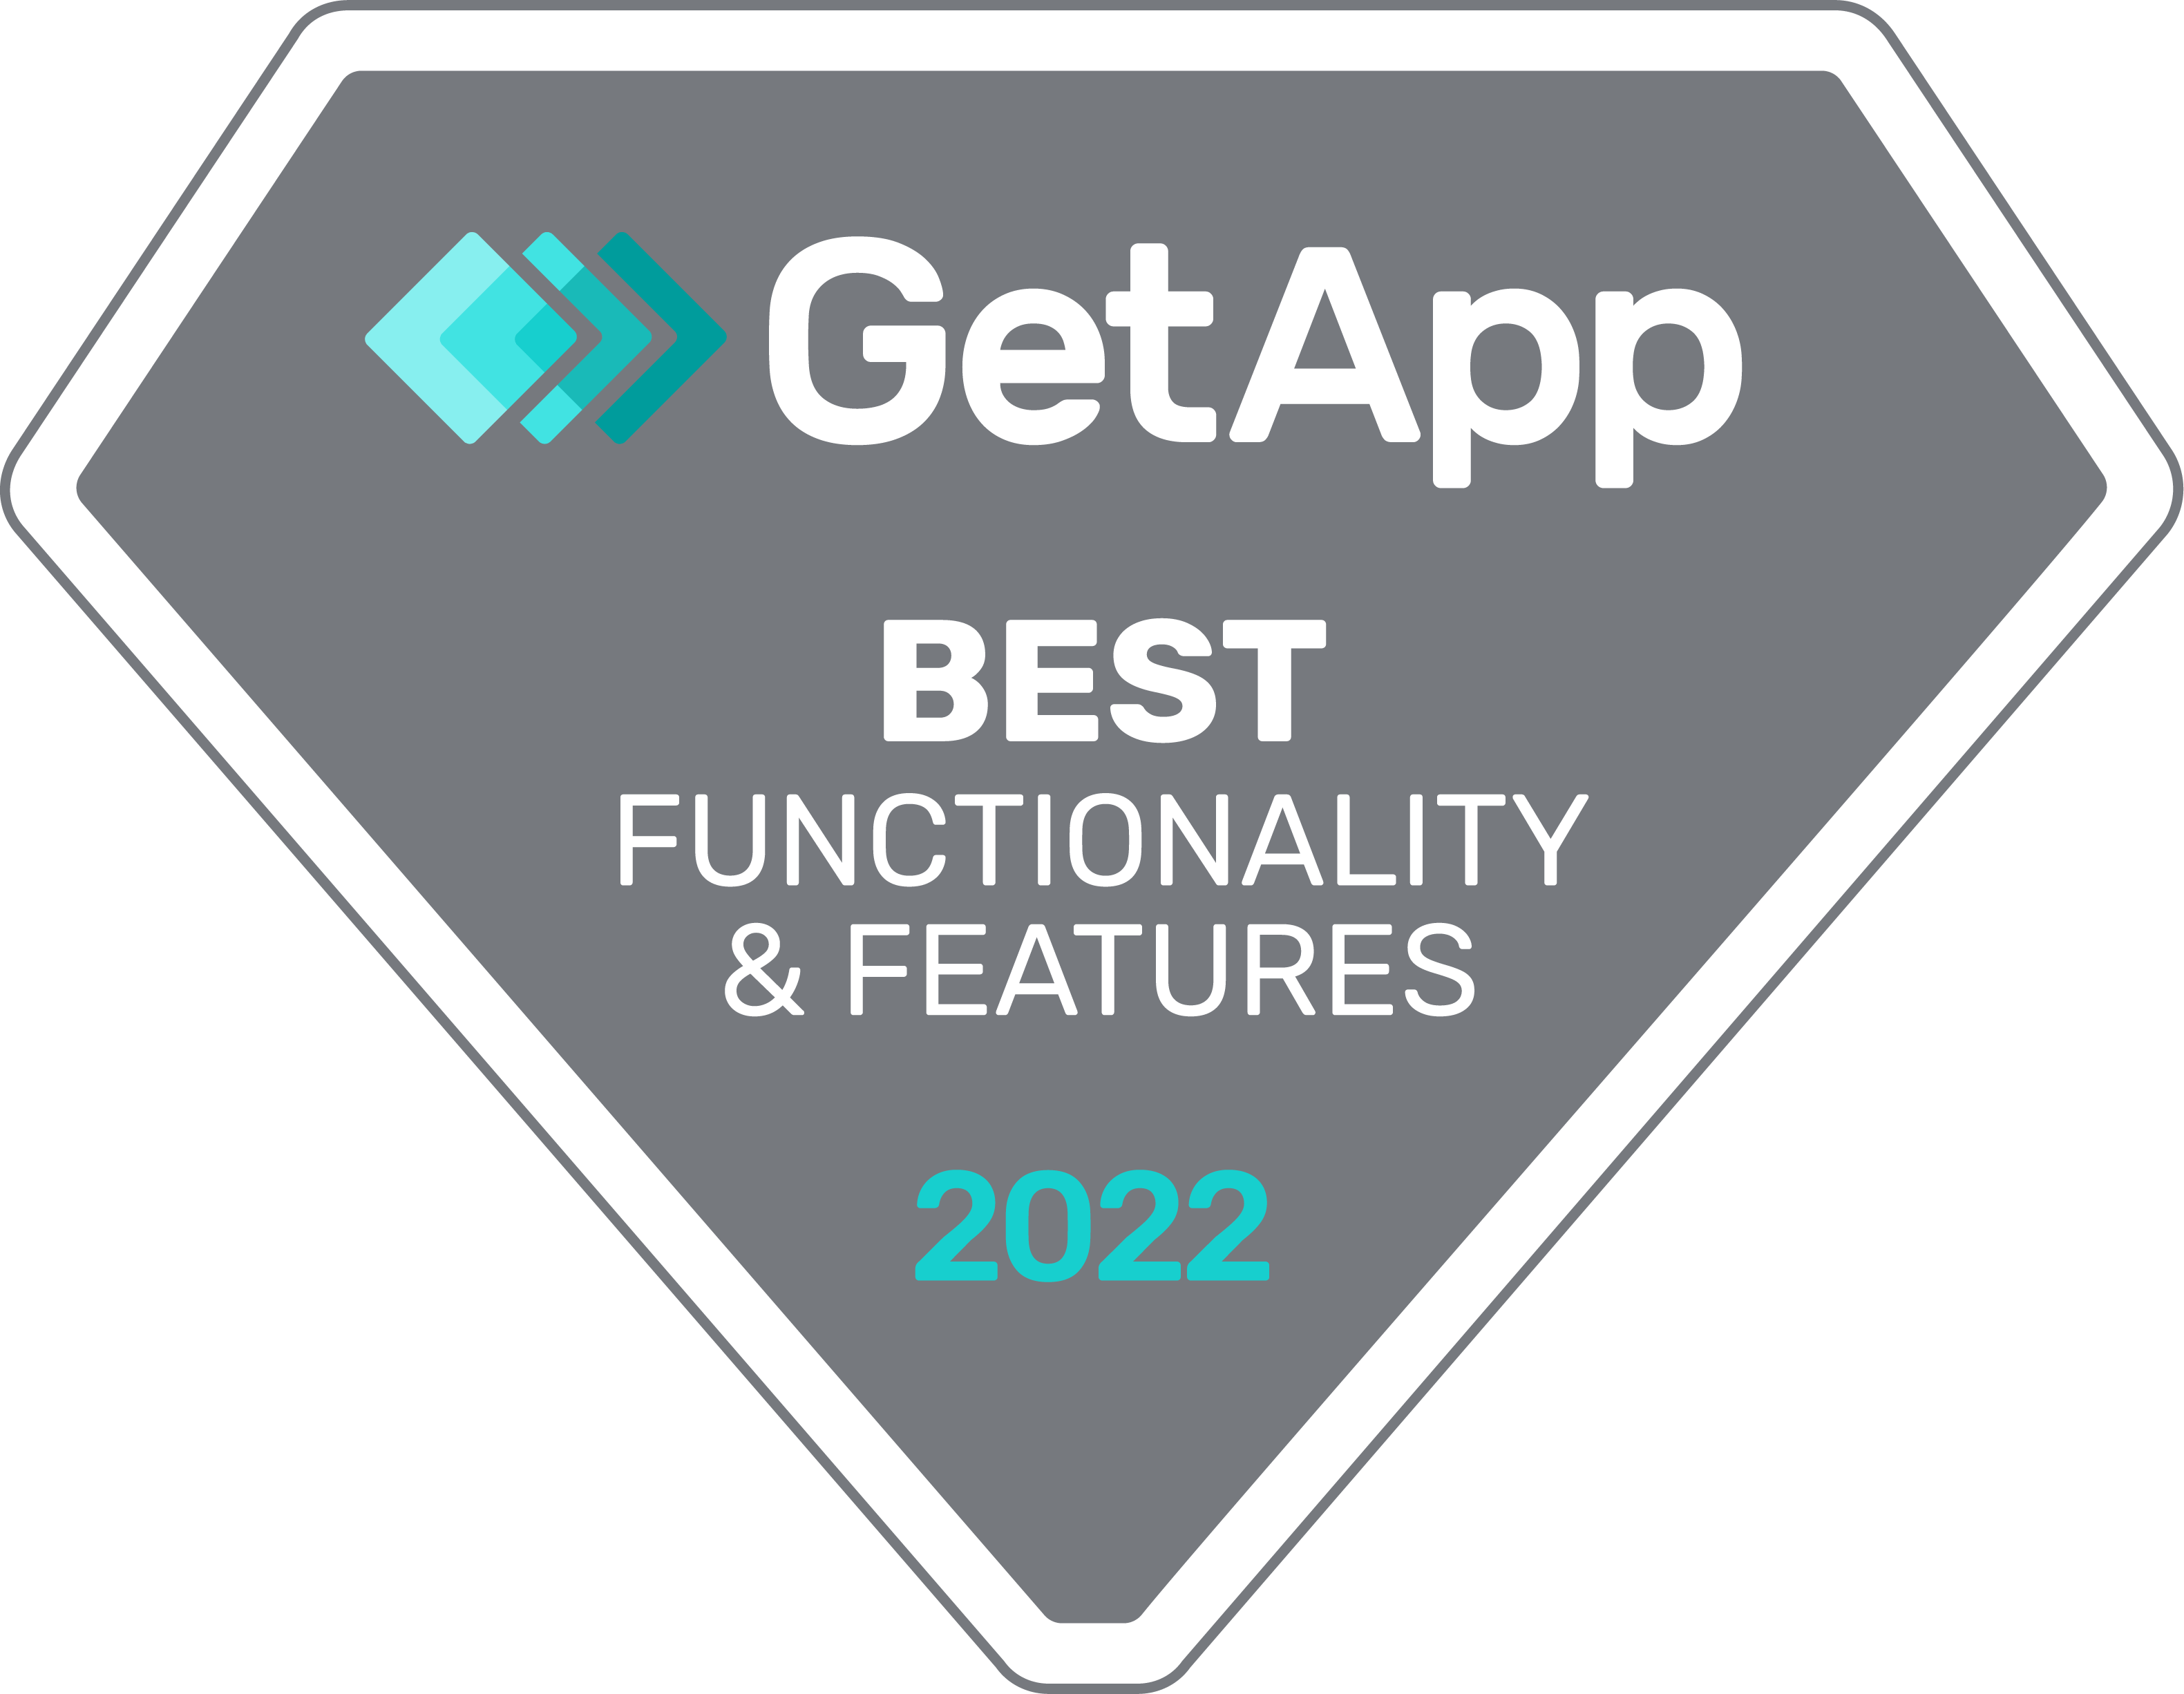 GetApp Best Functionality and Features 2022